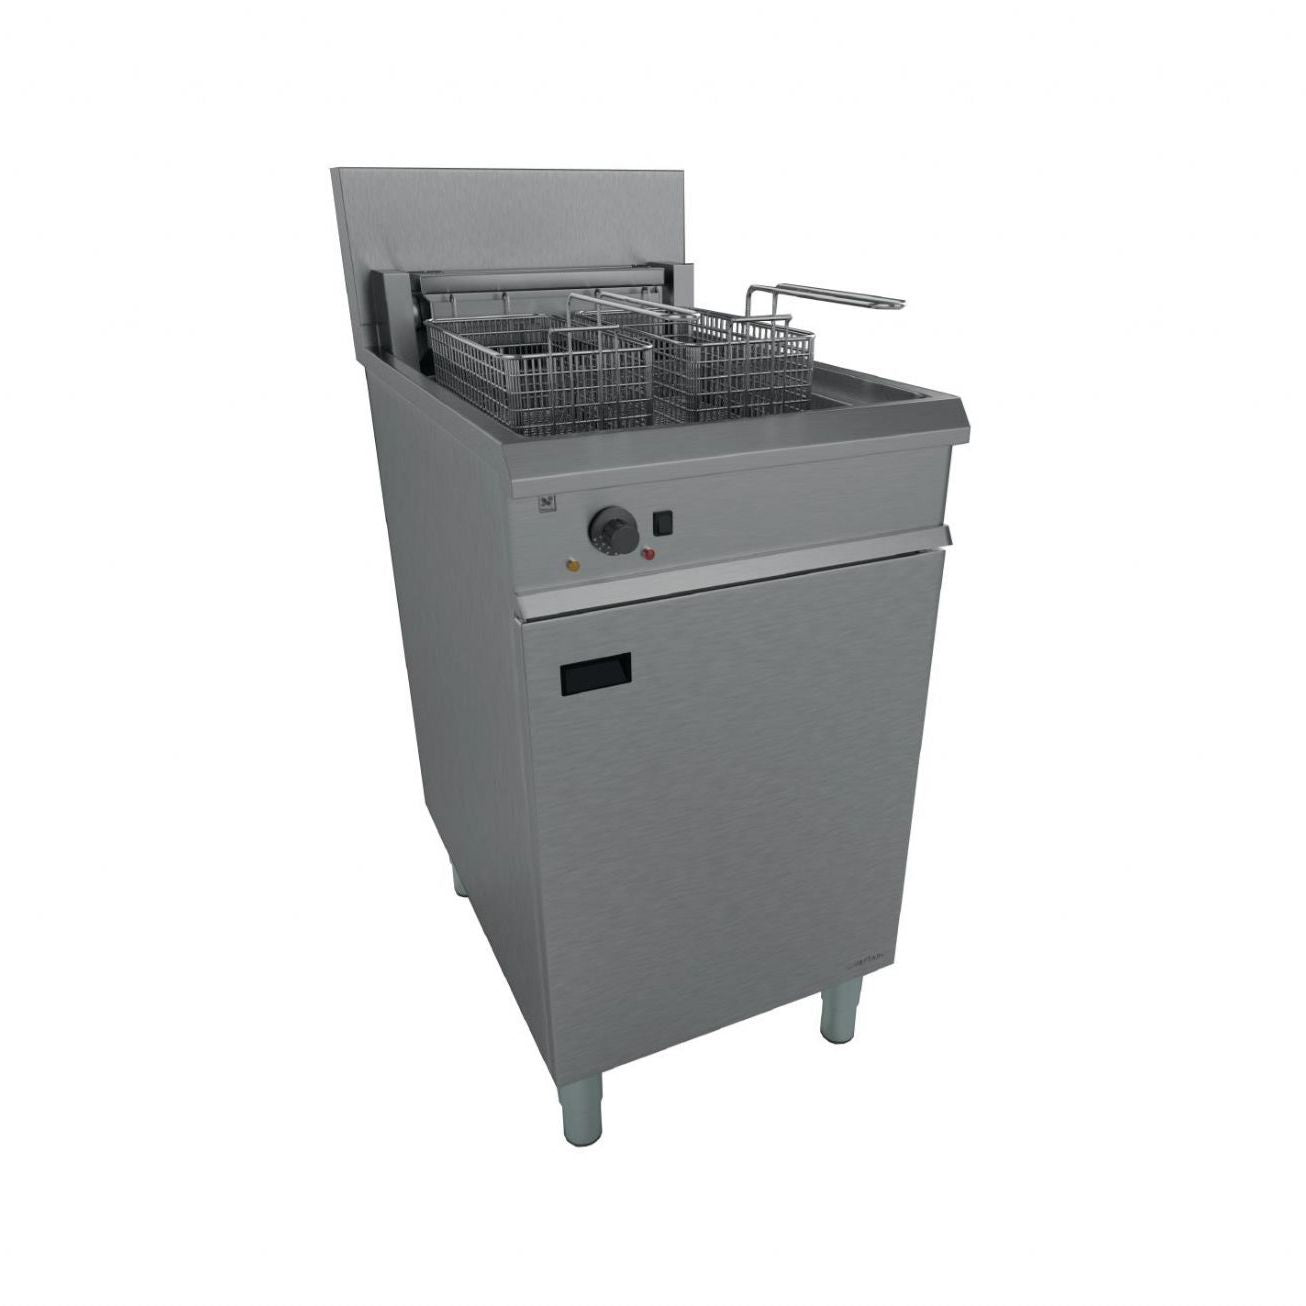 Falcon Chieftain Single Tank Twin Basket Free Standing Electric Fryer E1838 JD Catering Equipment Solutions Ltd